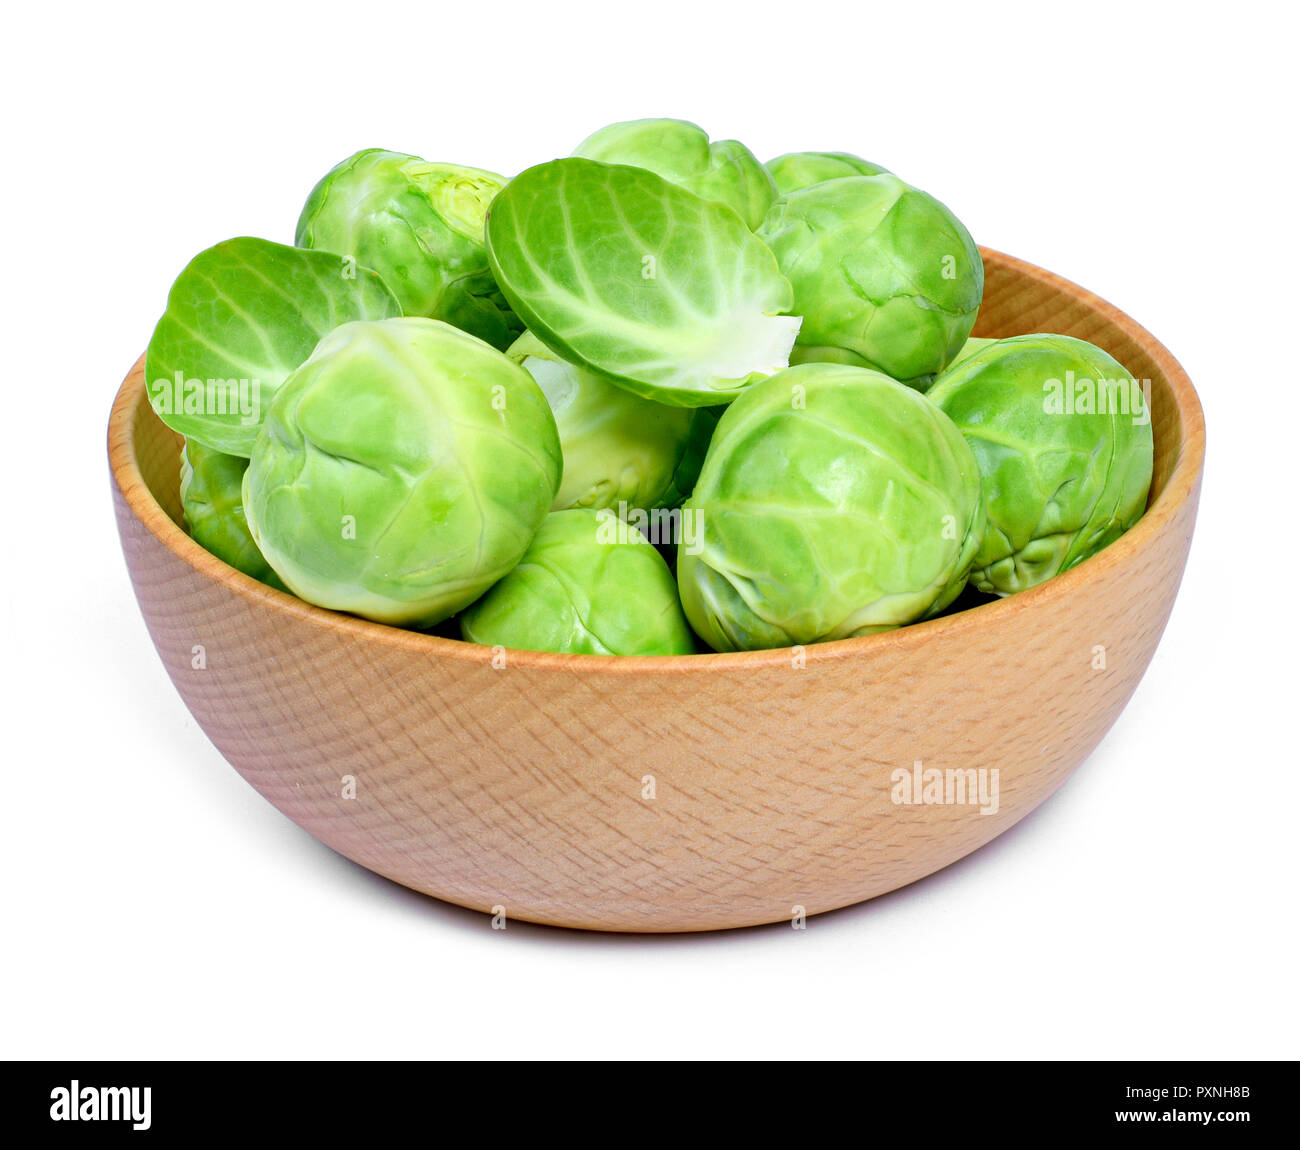 Delicious brussel sprouts in a wooden bowl. Brussel sprout, isolated on white background. Stock Photo